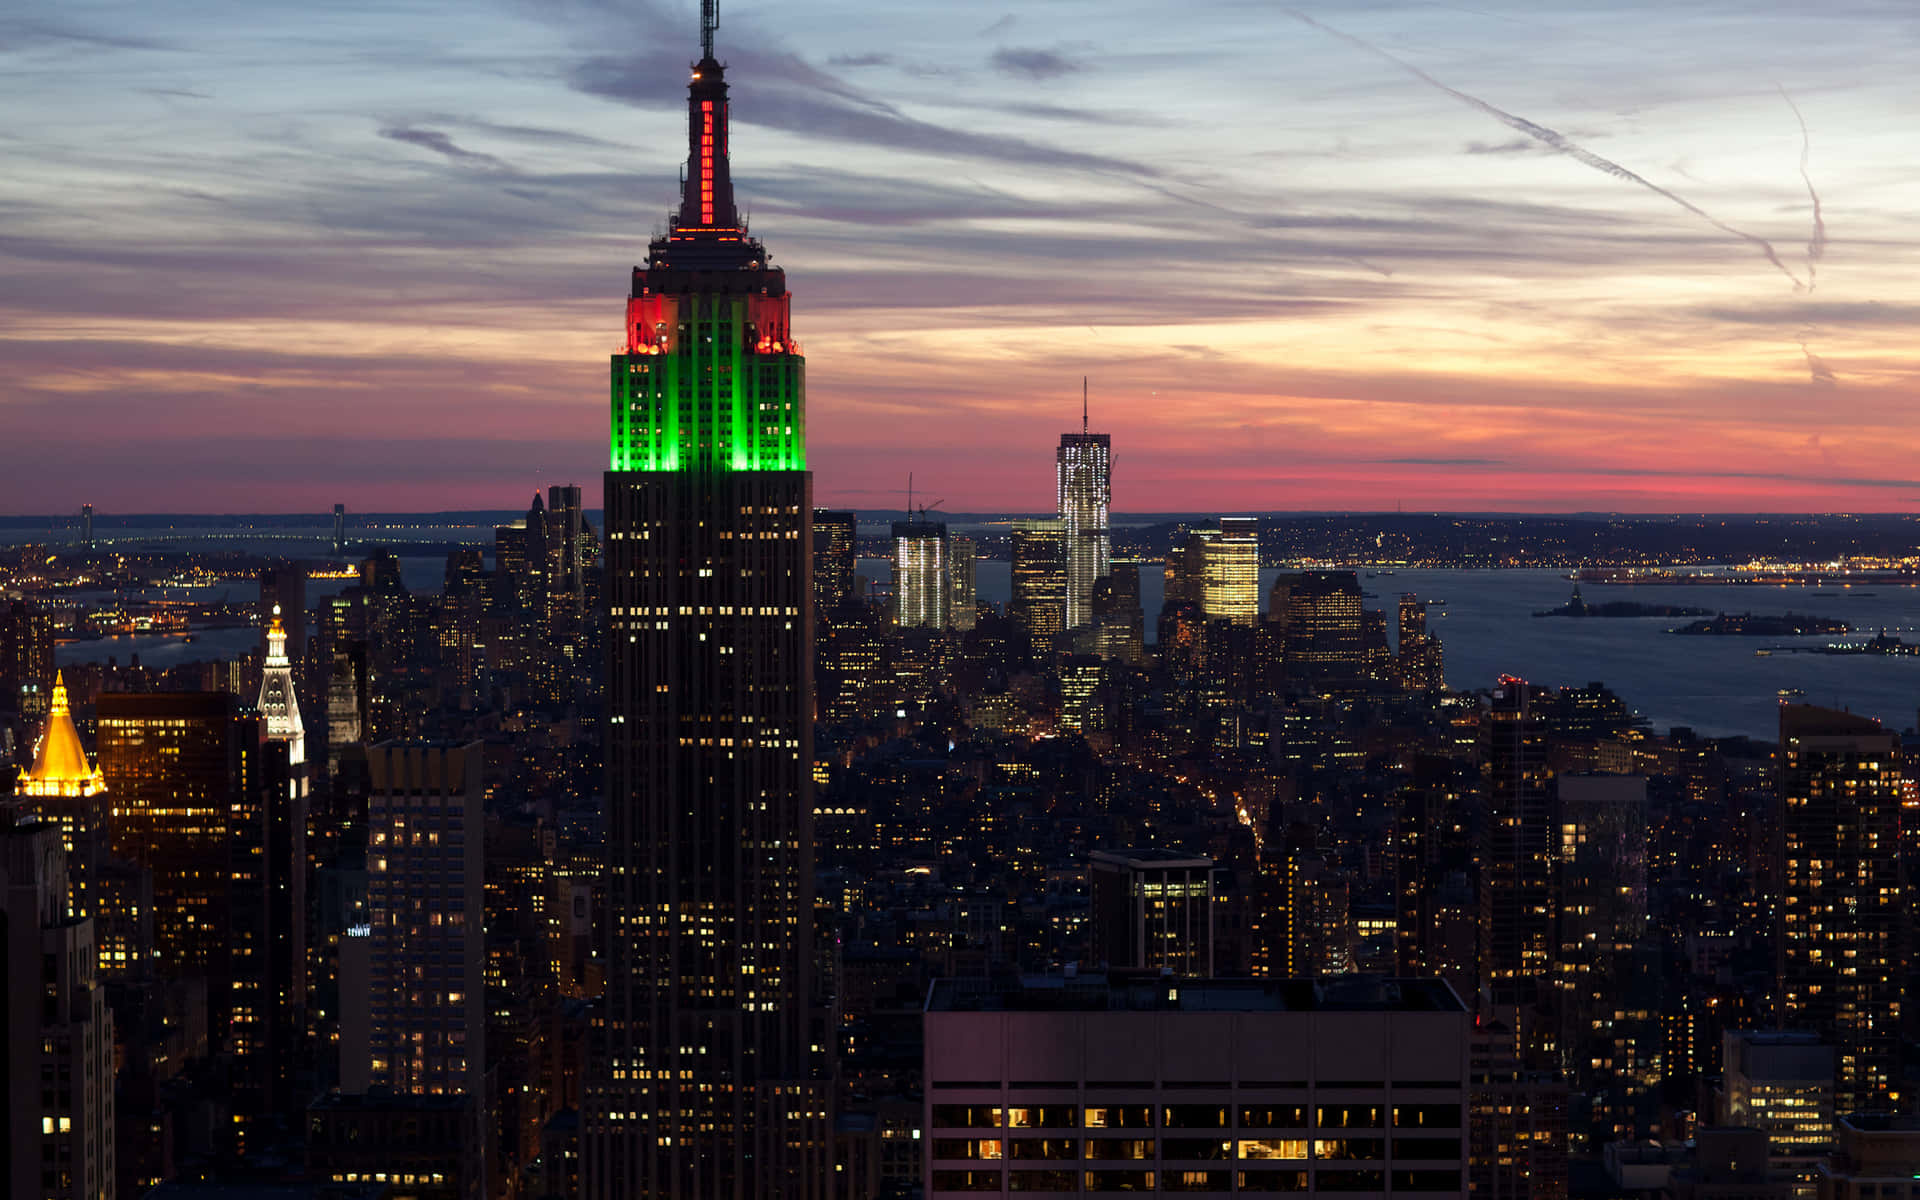 Experience the beauty of the world-famous Empire State Building lit up at night.